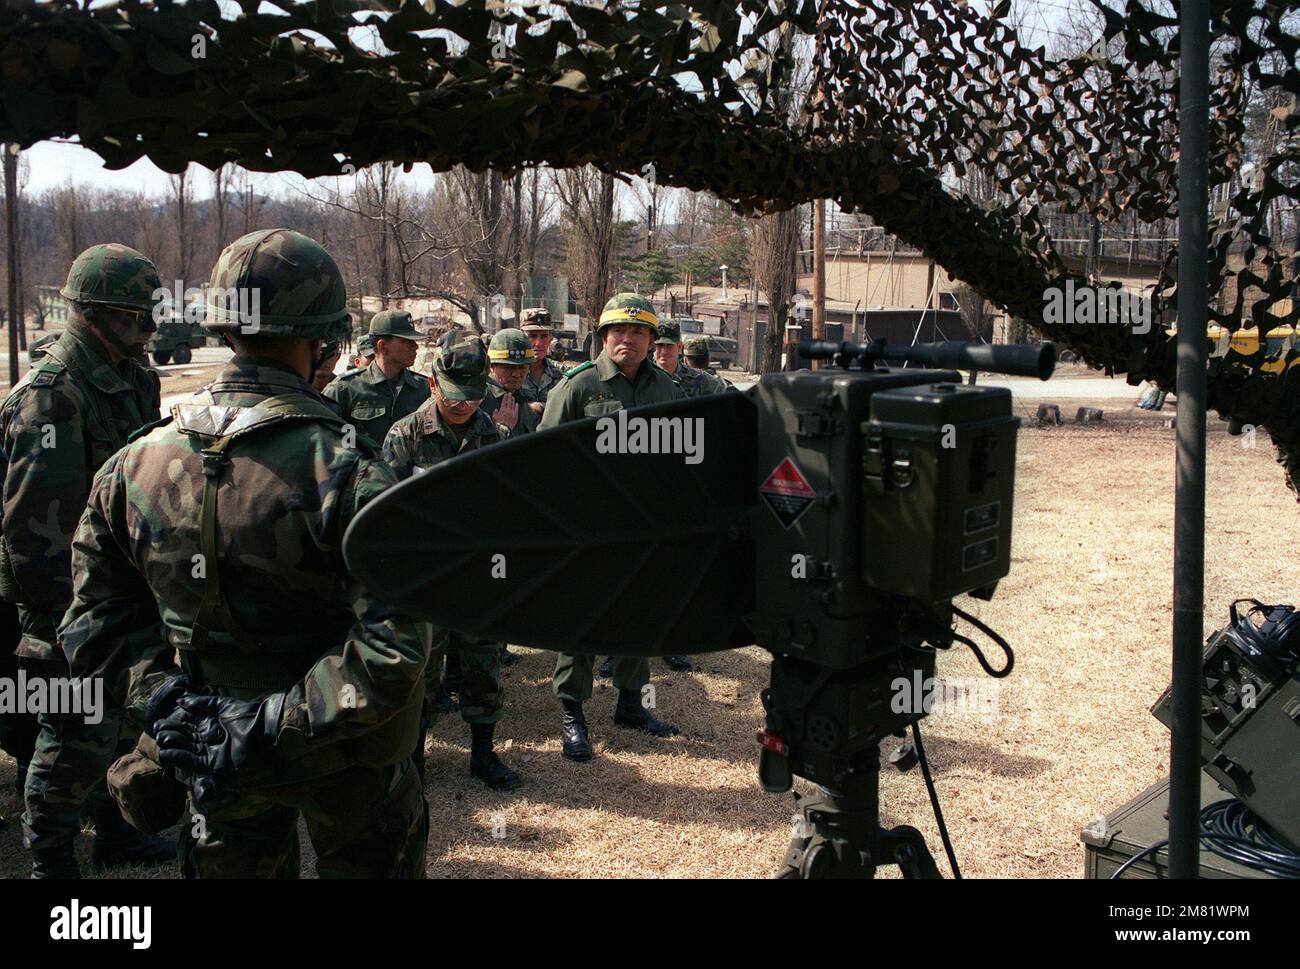 LT. GEN. Kim Dong Chun, center, commander, III Corps, South Korean army, inspects electronic equipment displayed by the 125th Signal Bn., 25th Inf. Div., during the joint South Korean/U.S. exercise Team Spirit '84. AN/PPS-5 ground surveillance equipment is visible in the foreground. Subject Operation/Series: TEAM SPIRIT '84 Base: Wonju Country: South Korea Stock Photo